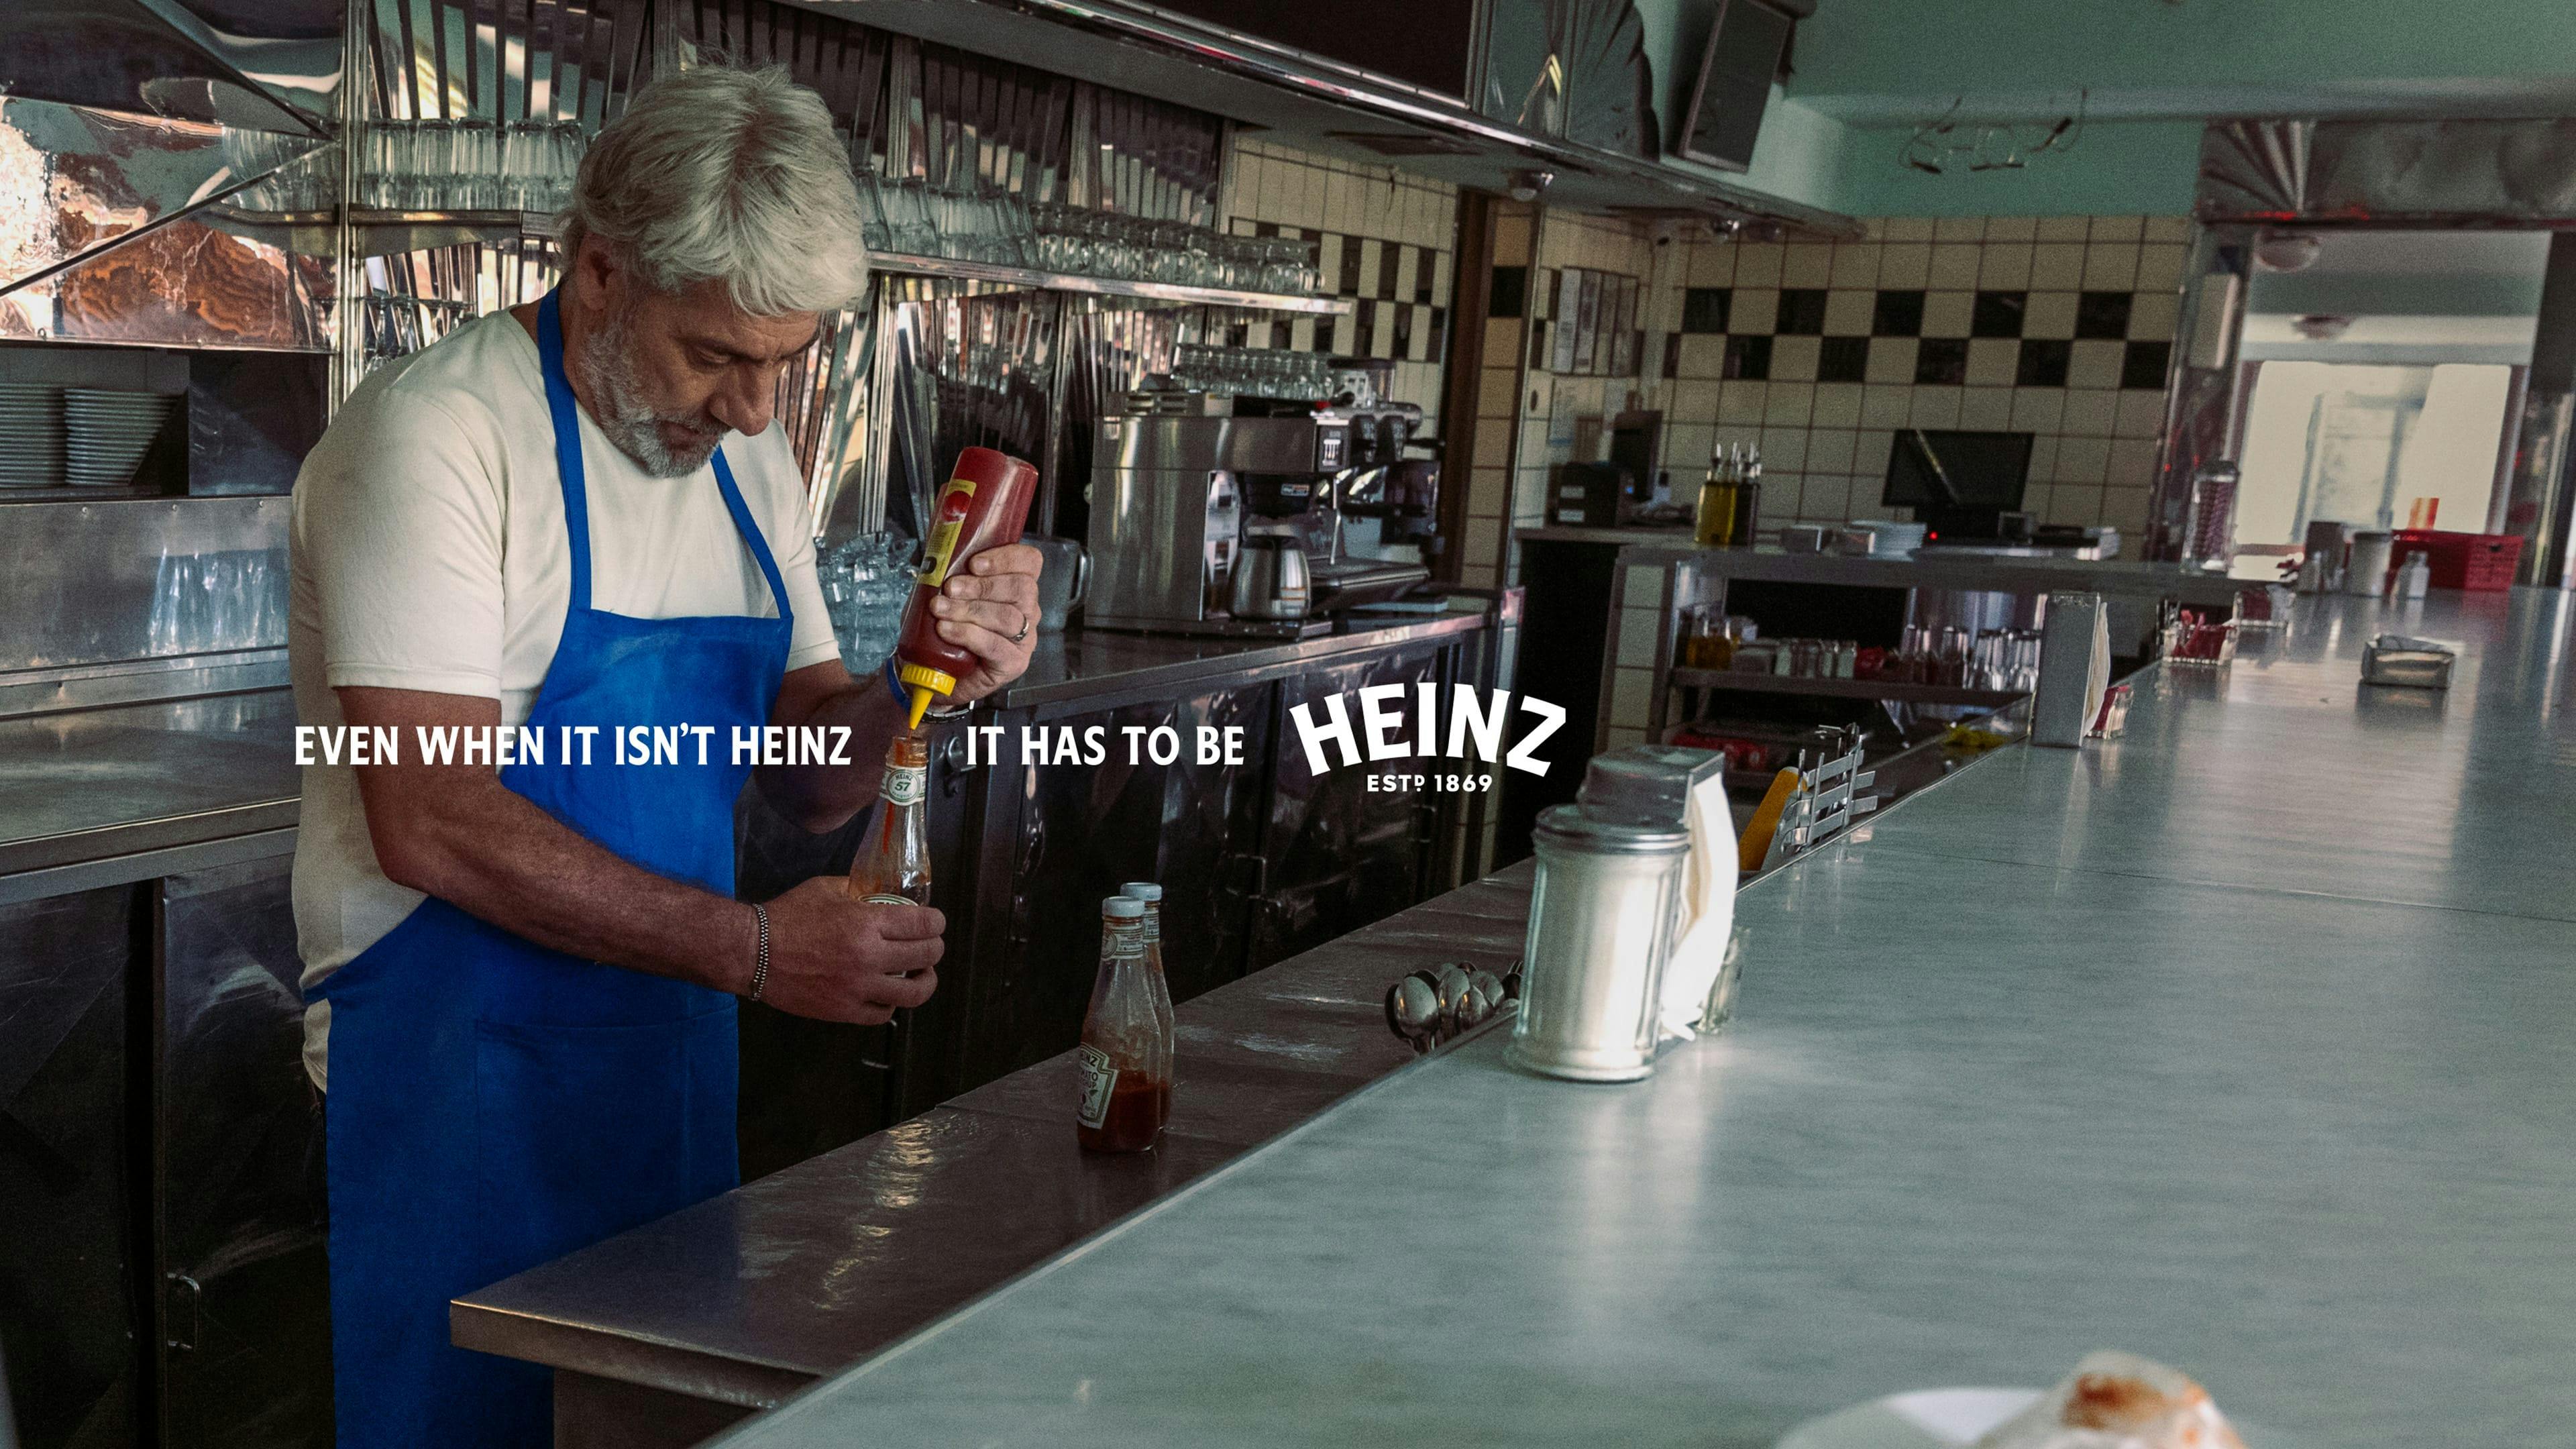 A man with white hair and a blue apron is putting non-Heinz ketchup into a Heinz ketchup bottle in a diner setting, with the text "Even when it isn't Heinz, it has to be Heinz."